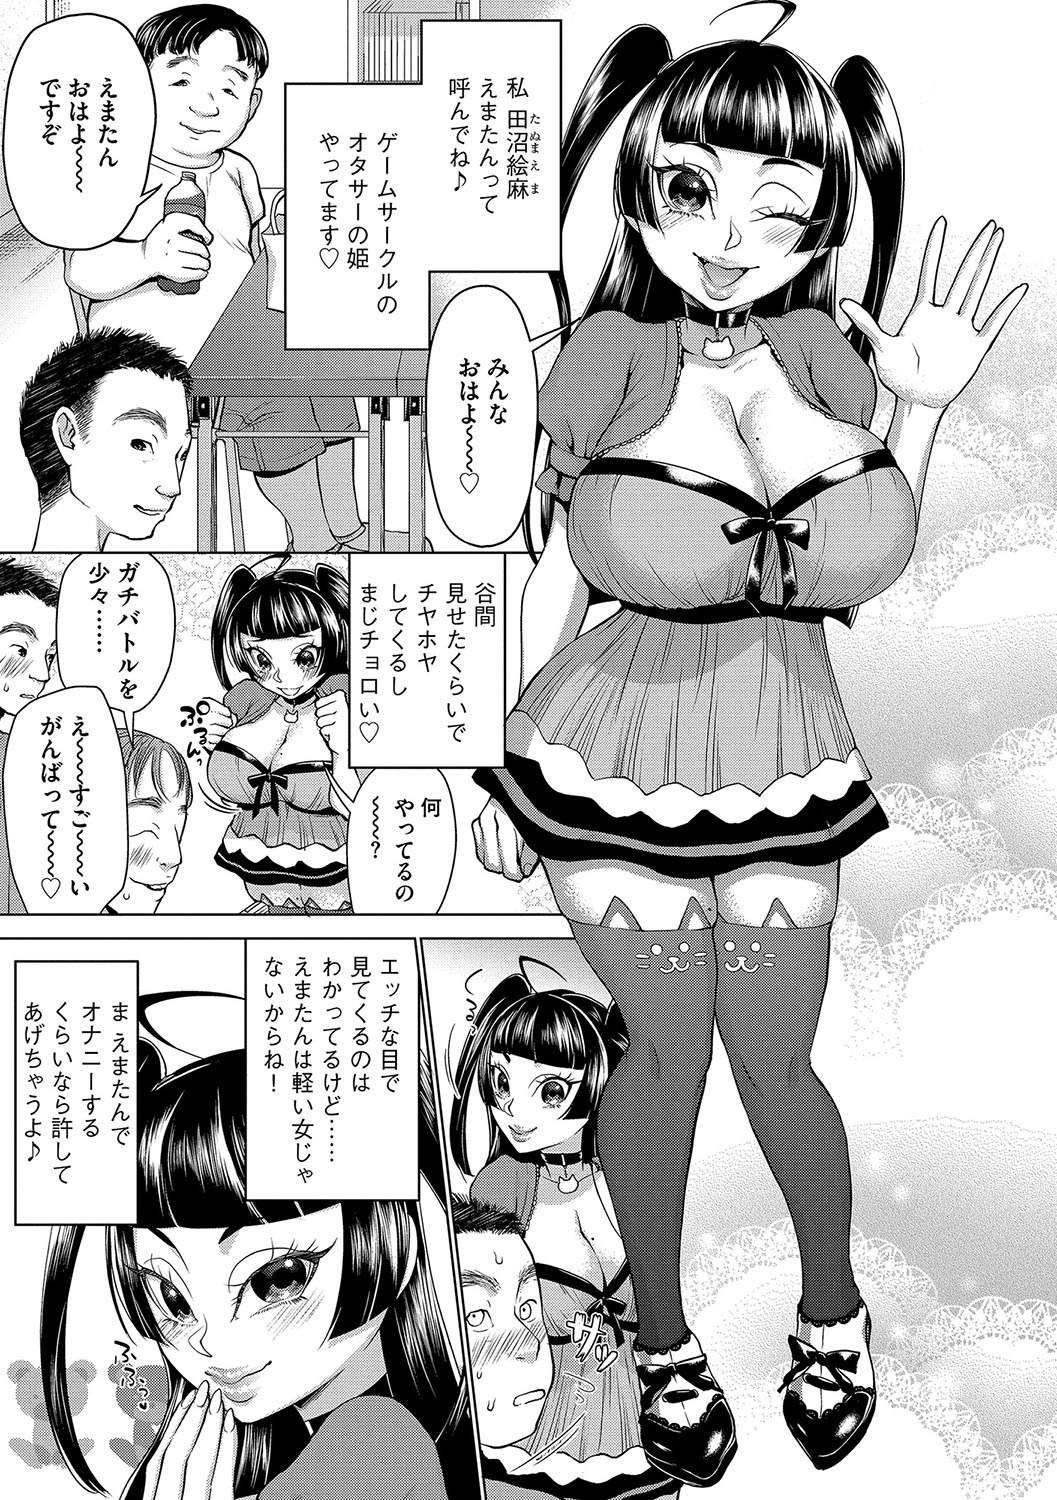 [Anthology] Cyberia Maniacs Saimin Choukyou Deluxe Vol. 006 [Digital] page 32 full